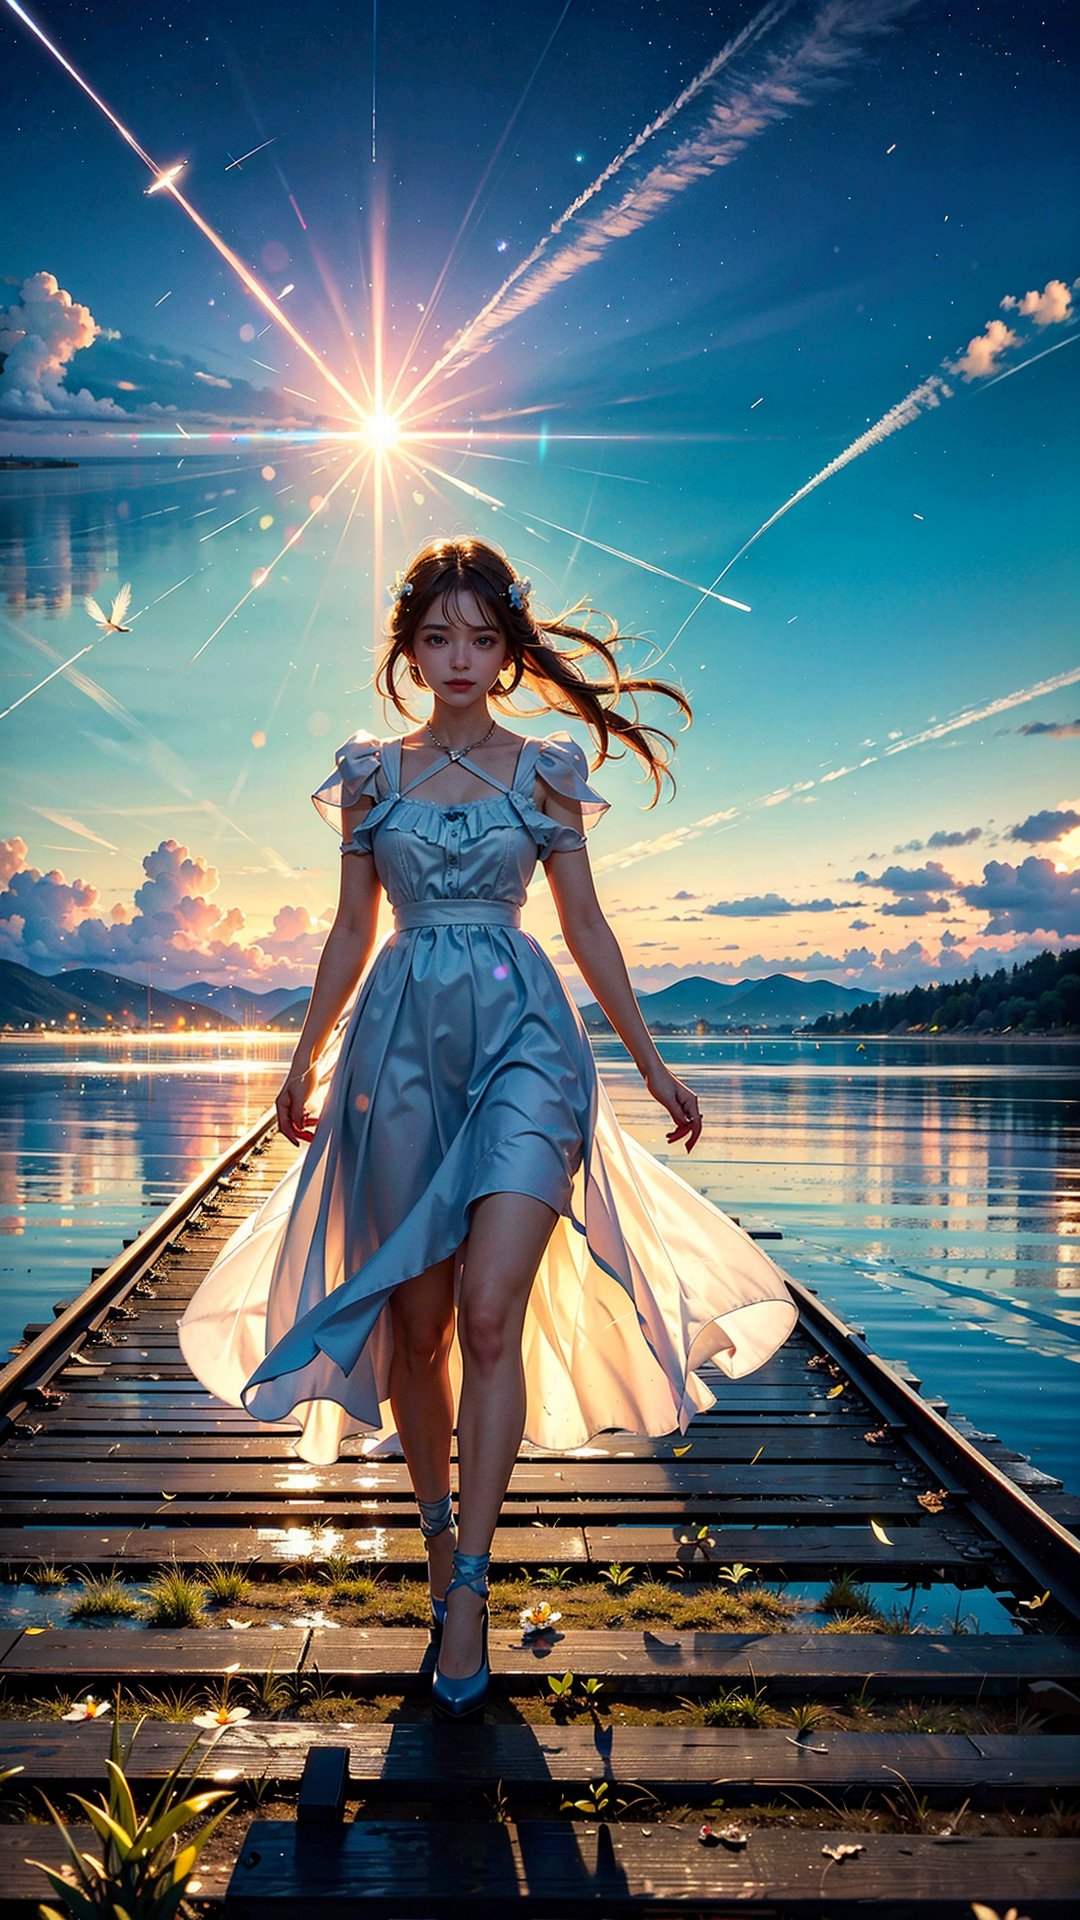 (masterpiece:1.2, best quality:1.2), (ultra detailed), (realistic), beautiful, high quality, highres:1.1, aesthetic), a girl walking on a ((railroad track)), arms open and smiling, The railroad track is on the water, with the  horizon in the distance, There is no land, The sky is reflected water's surface, She wearing a white summer dress, white thunderclouds floating deep blue sky, lens flare, ray tracing, photo quality, high contrast summer scene,	 SILHOUETTE LIGHT PARTICLES